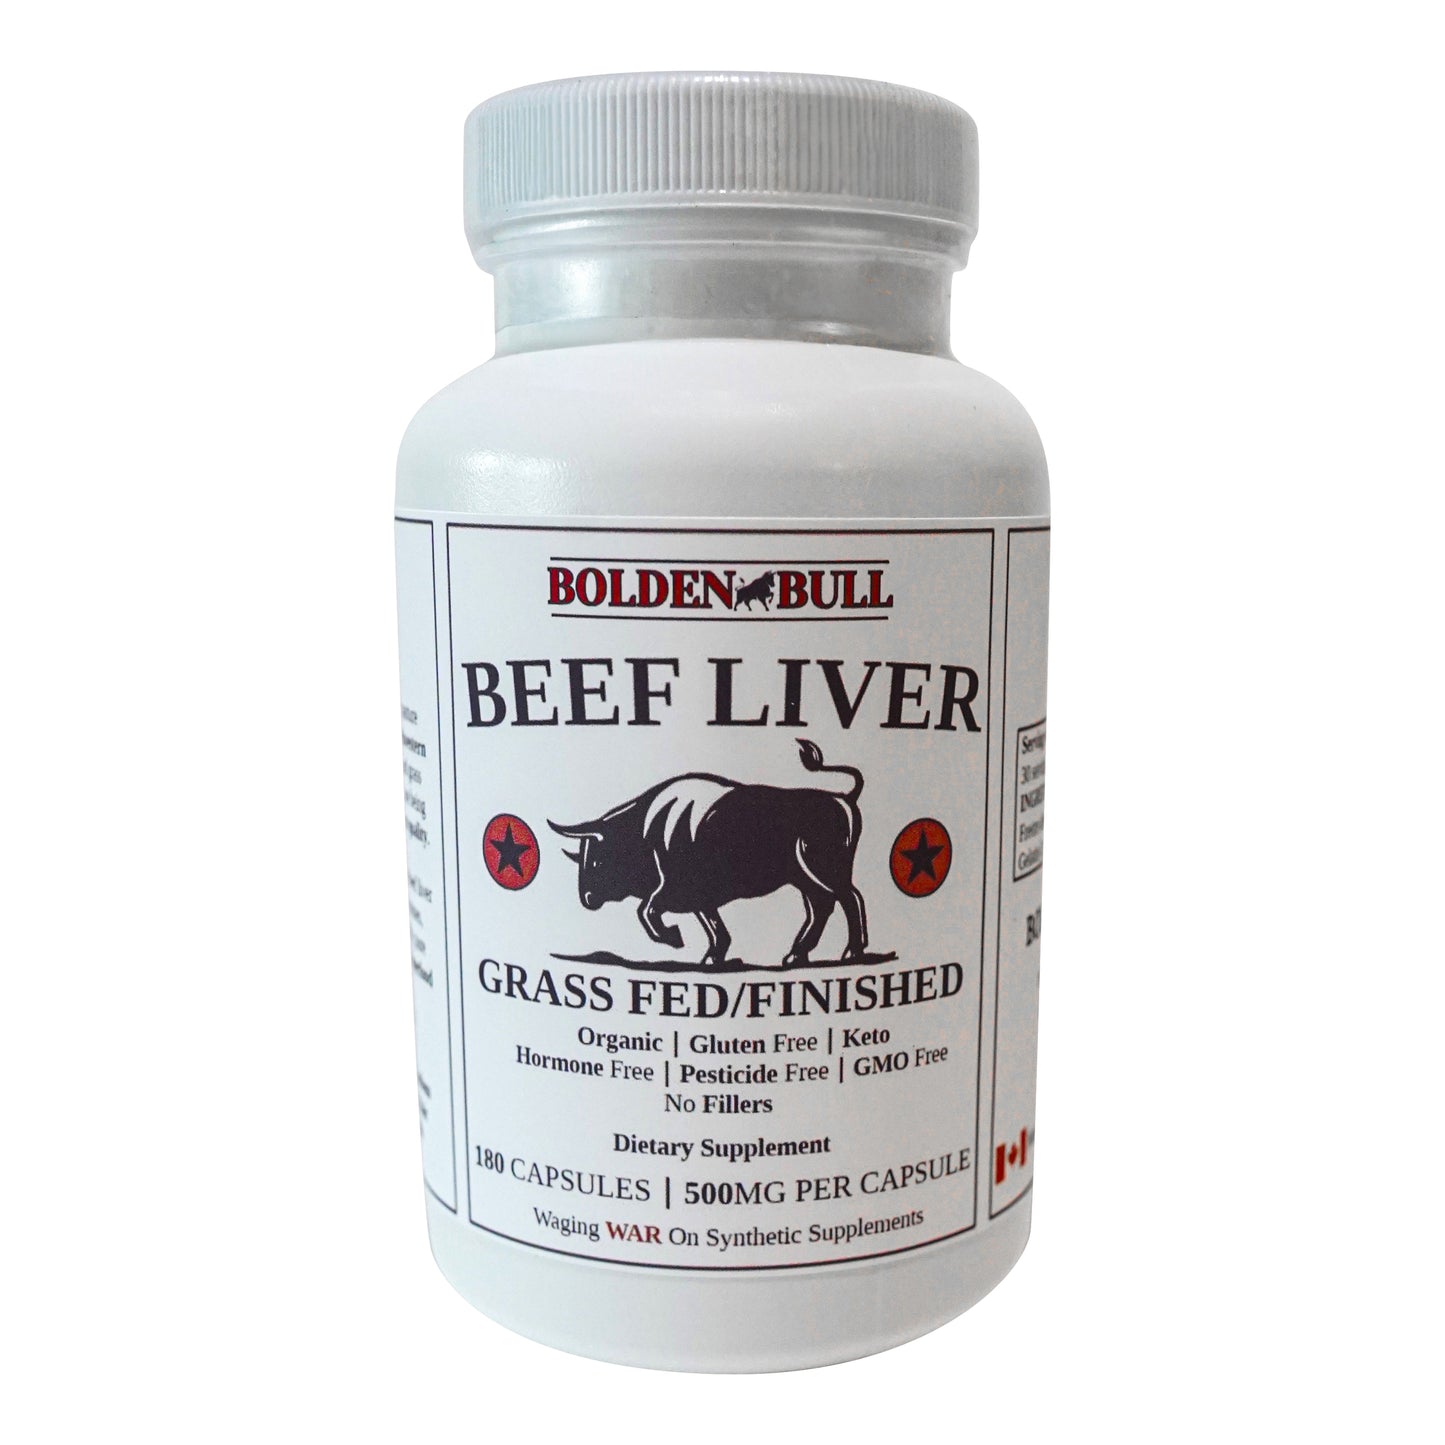 BoldenBull BEEF LIVER Supplement Grass-Fed/Finished